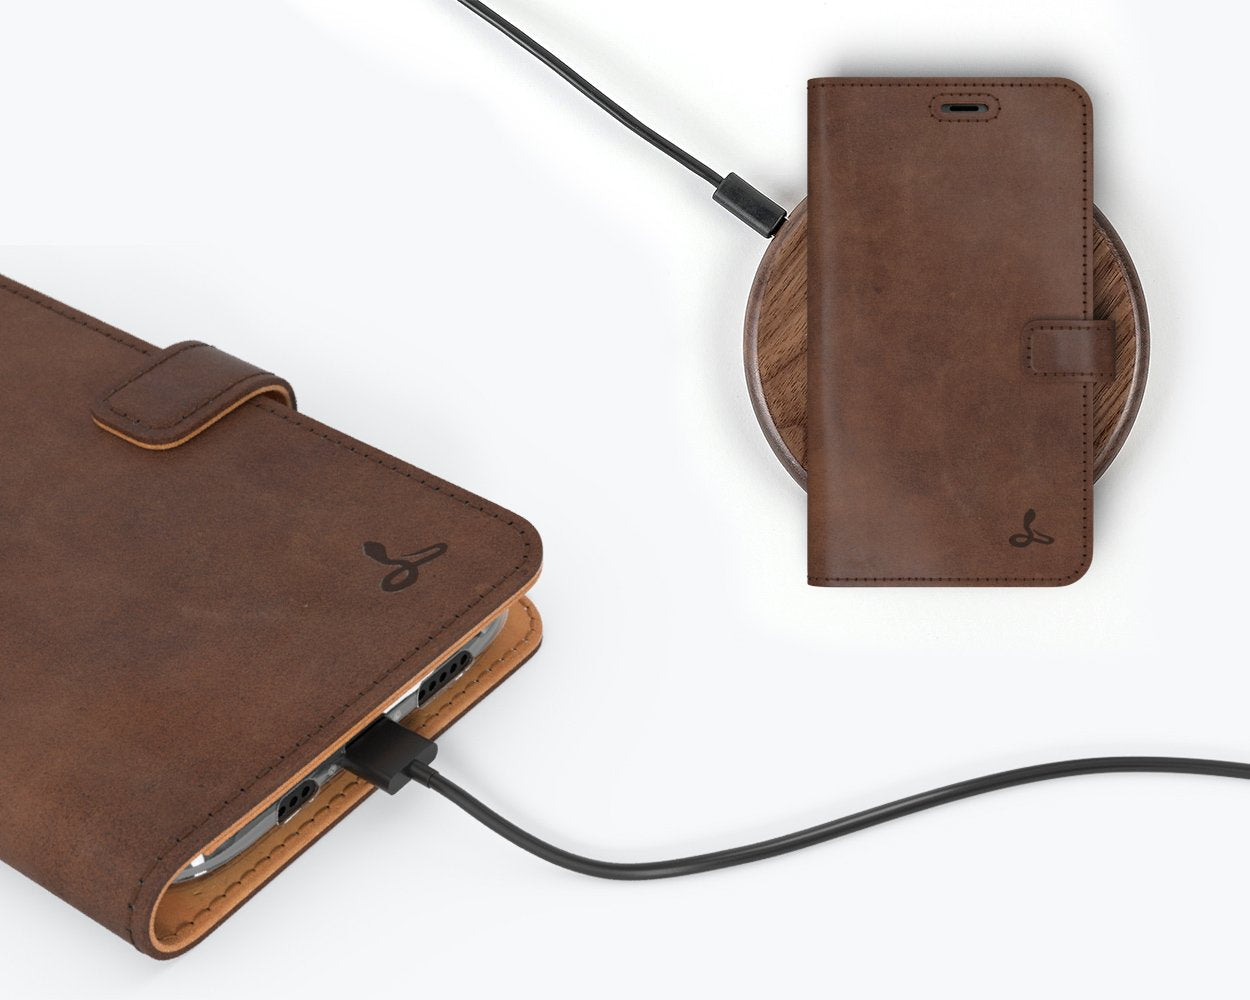 Vintage Leather Wallet - Apple iPhone 11 Pro Max